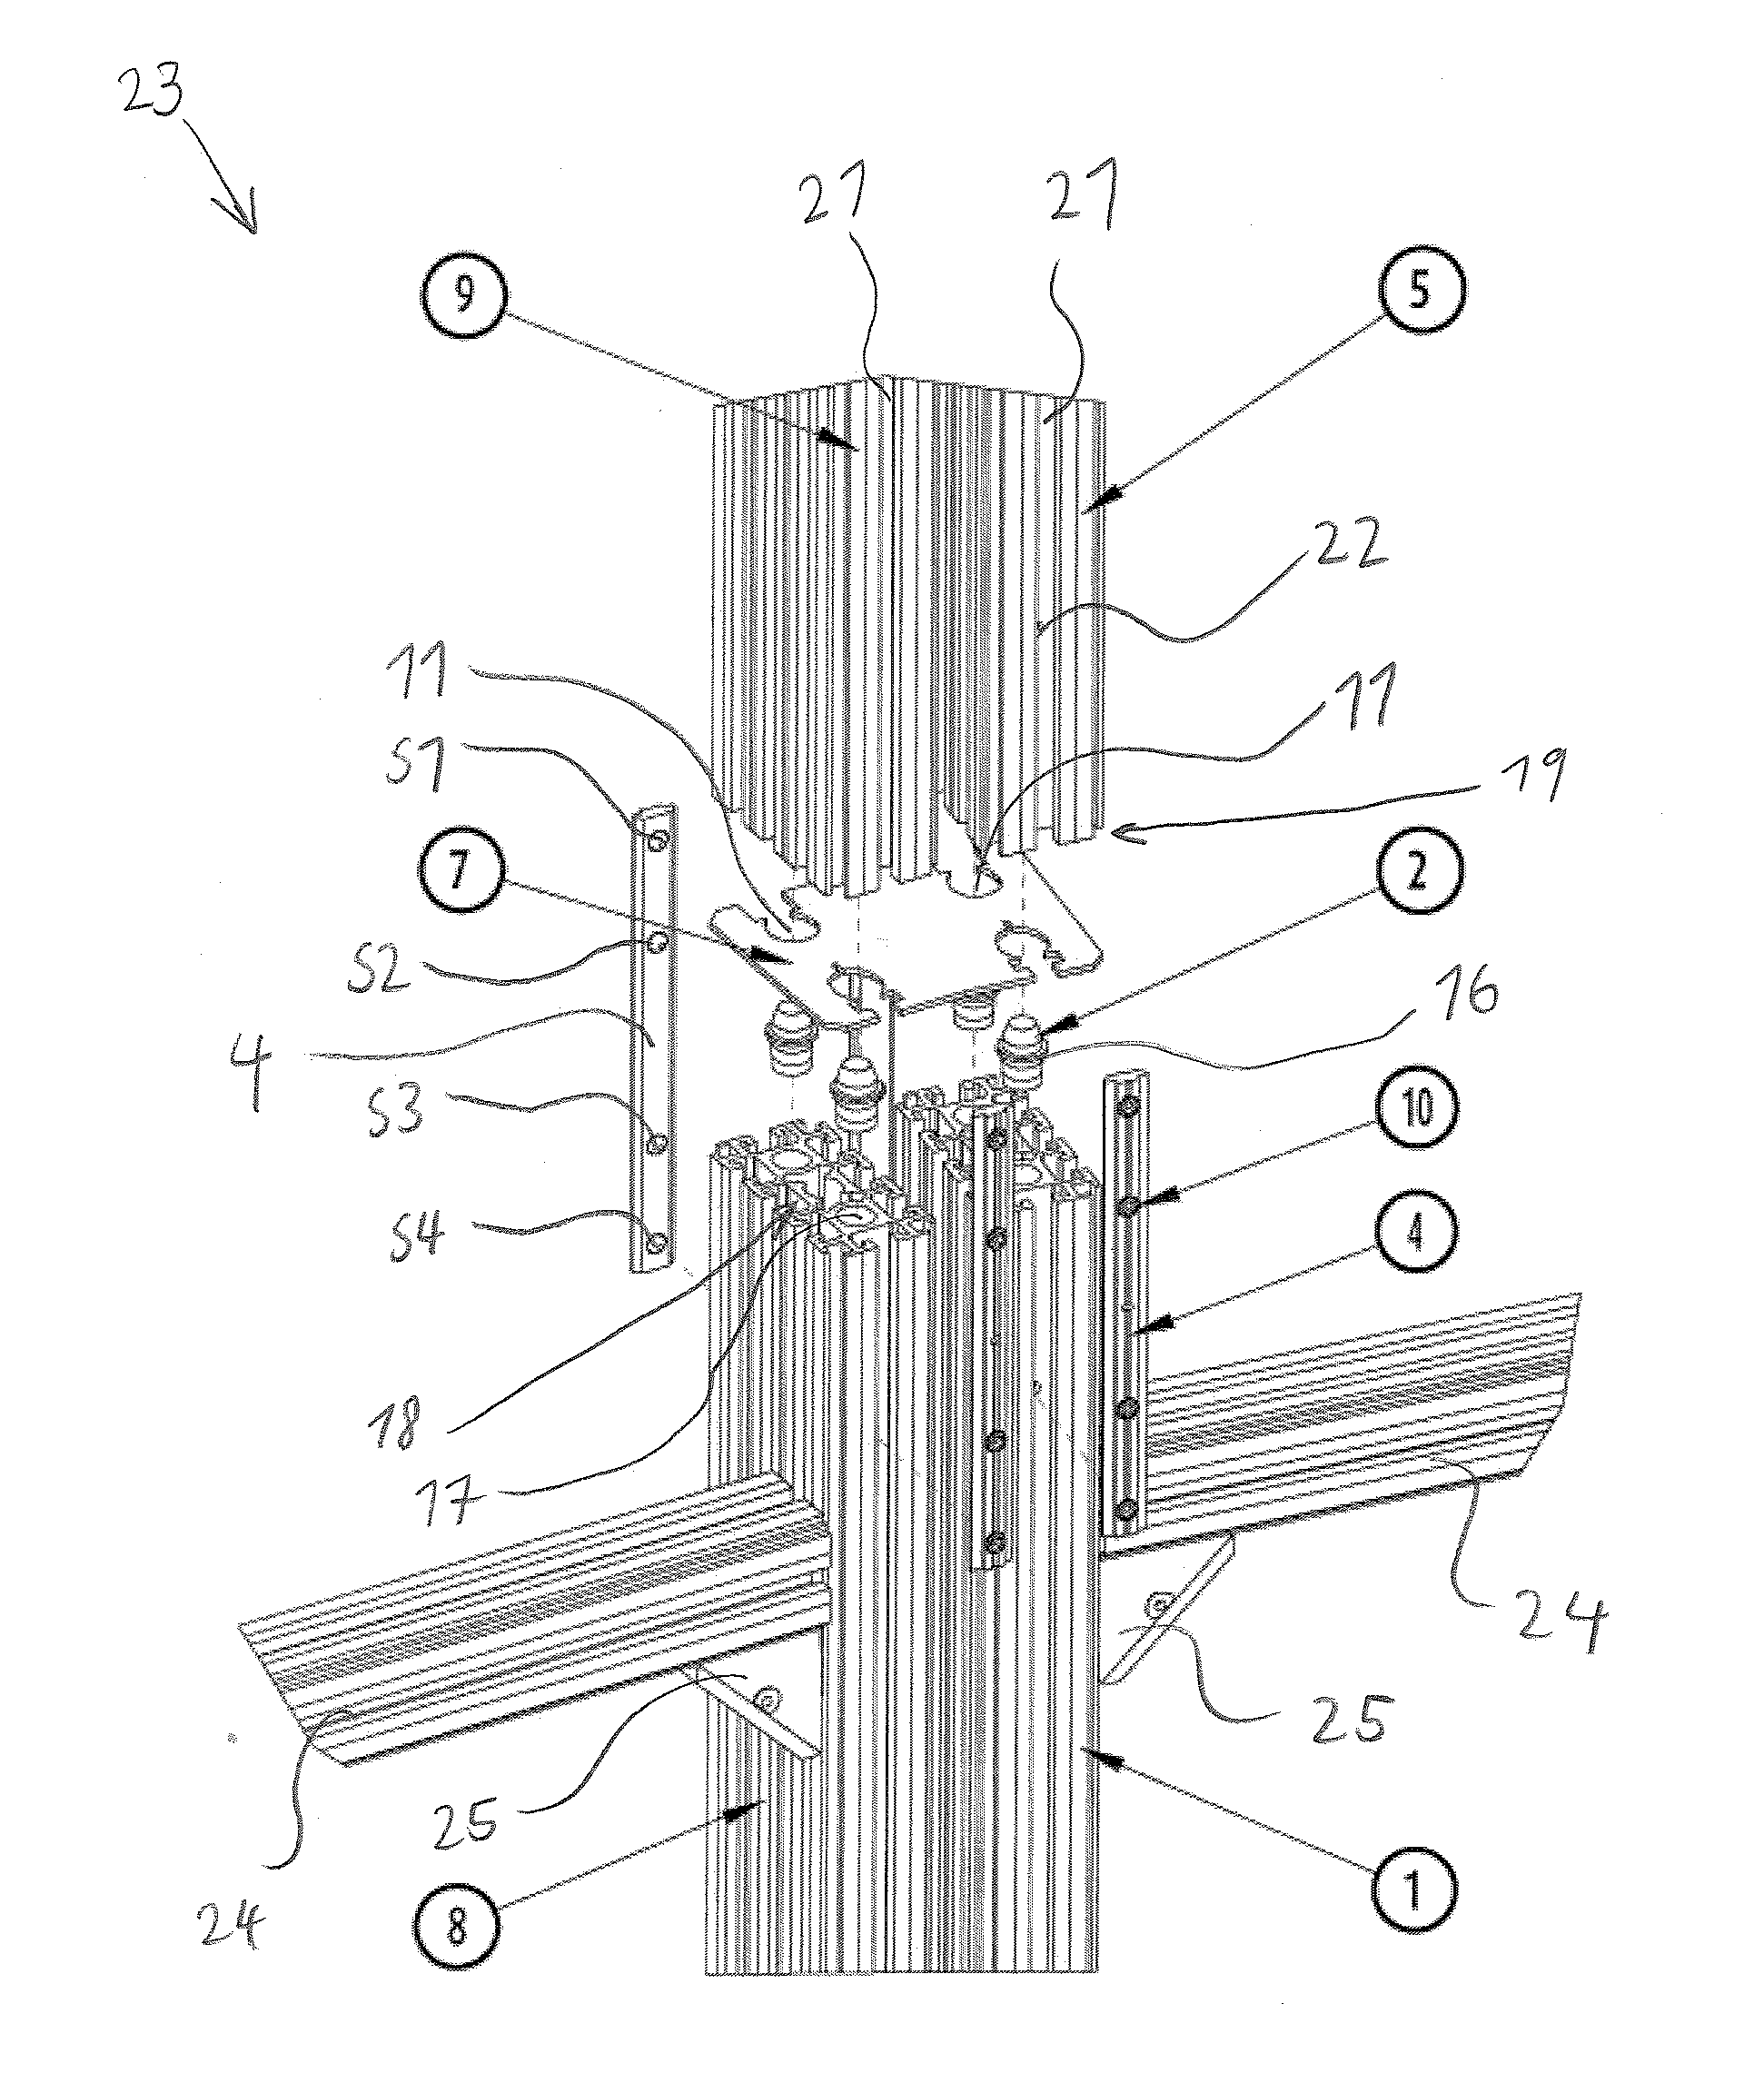 Spacer plate and support structure